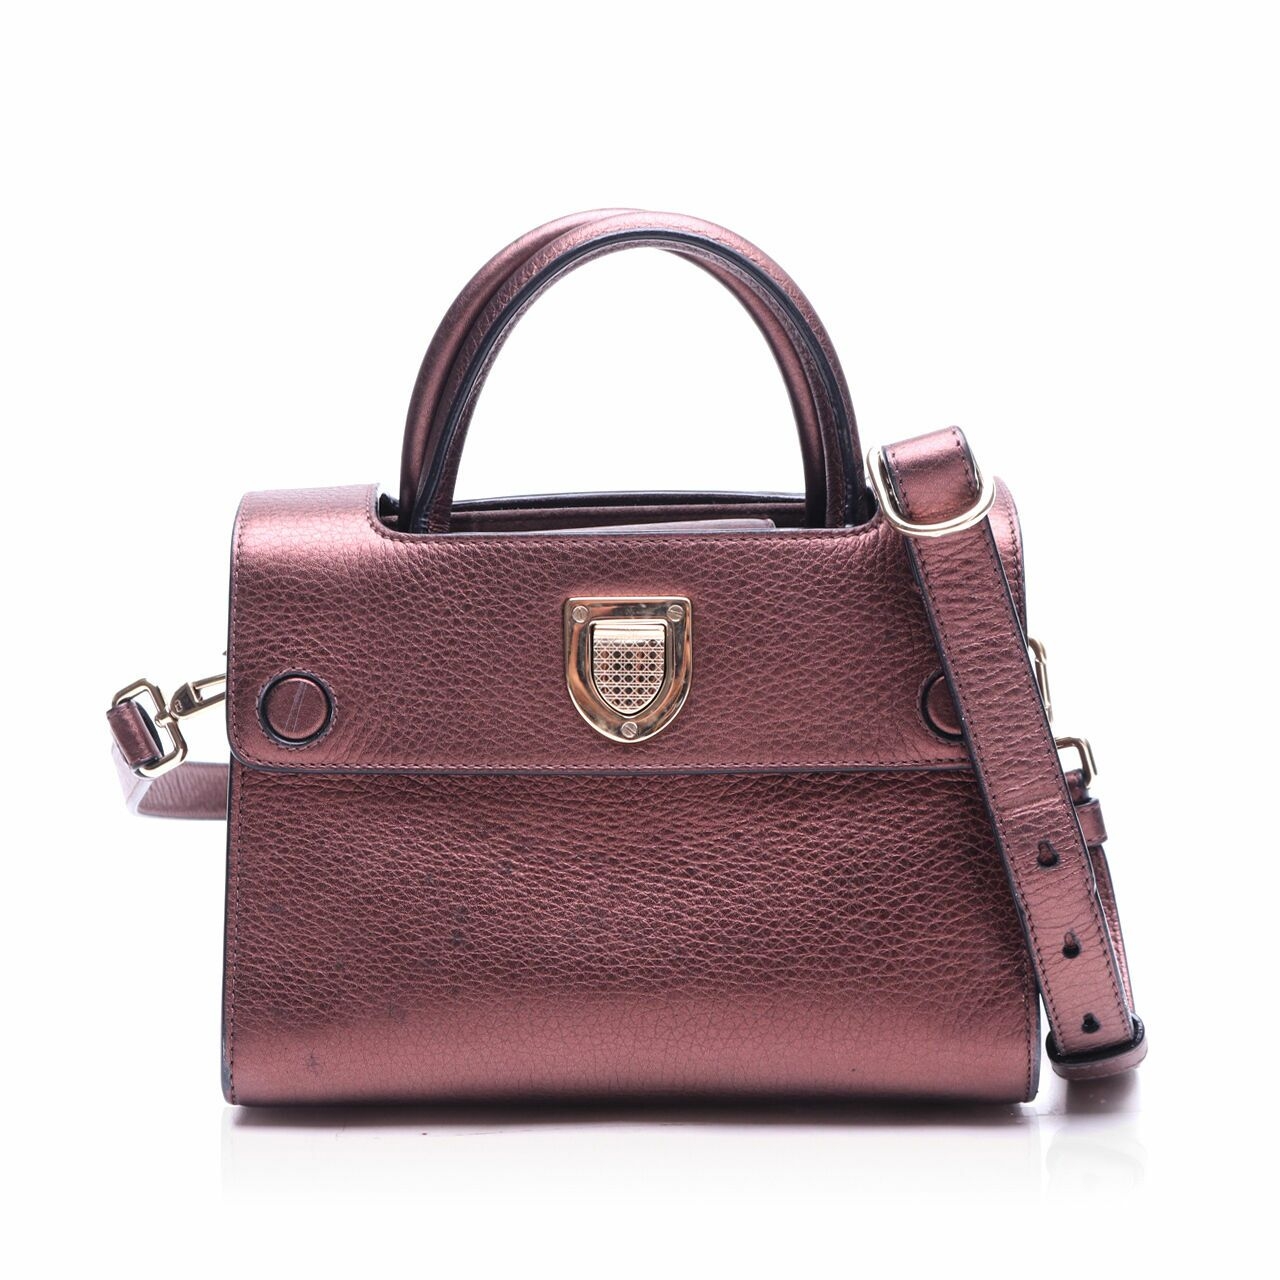 Christian Christian Dior Diorever Mettalic Copper/Brown Pebbled Leather Satchel Bag